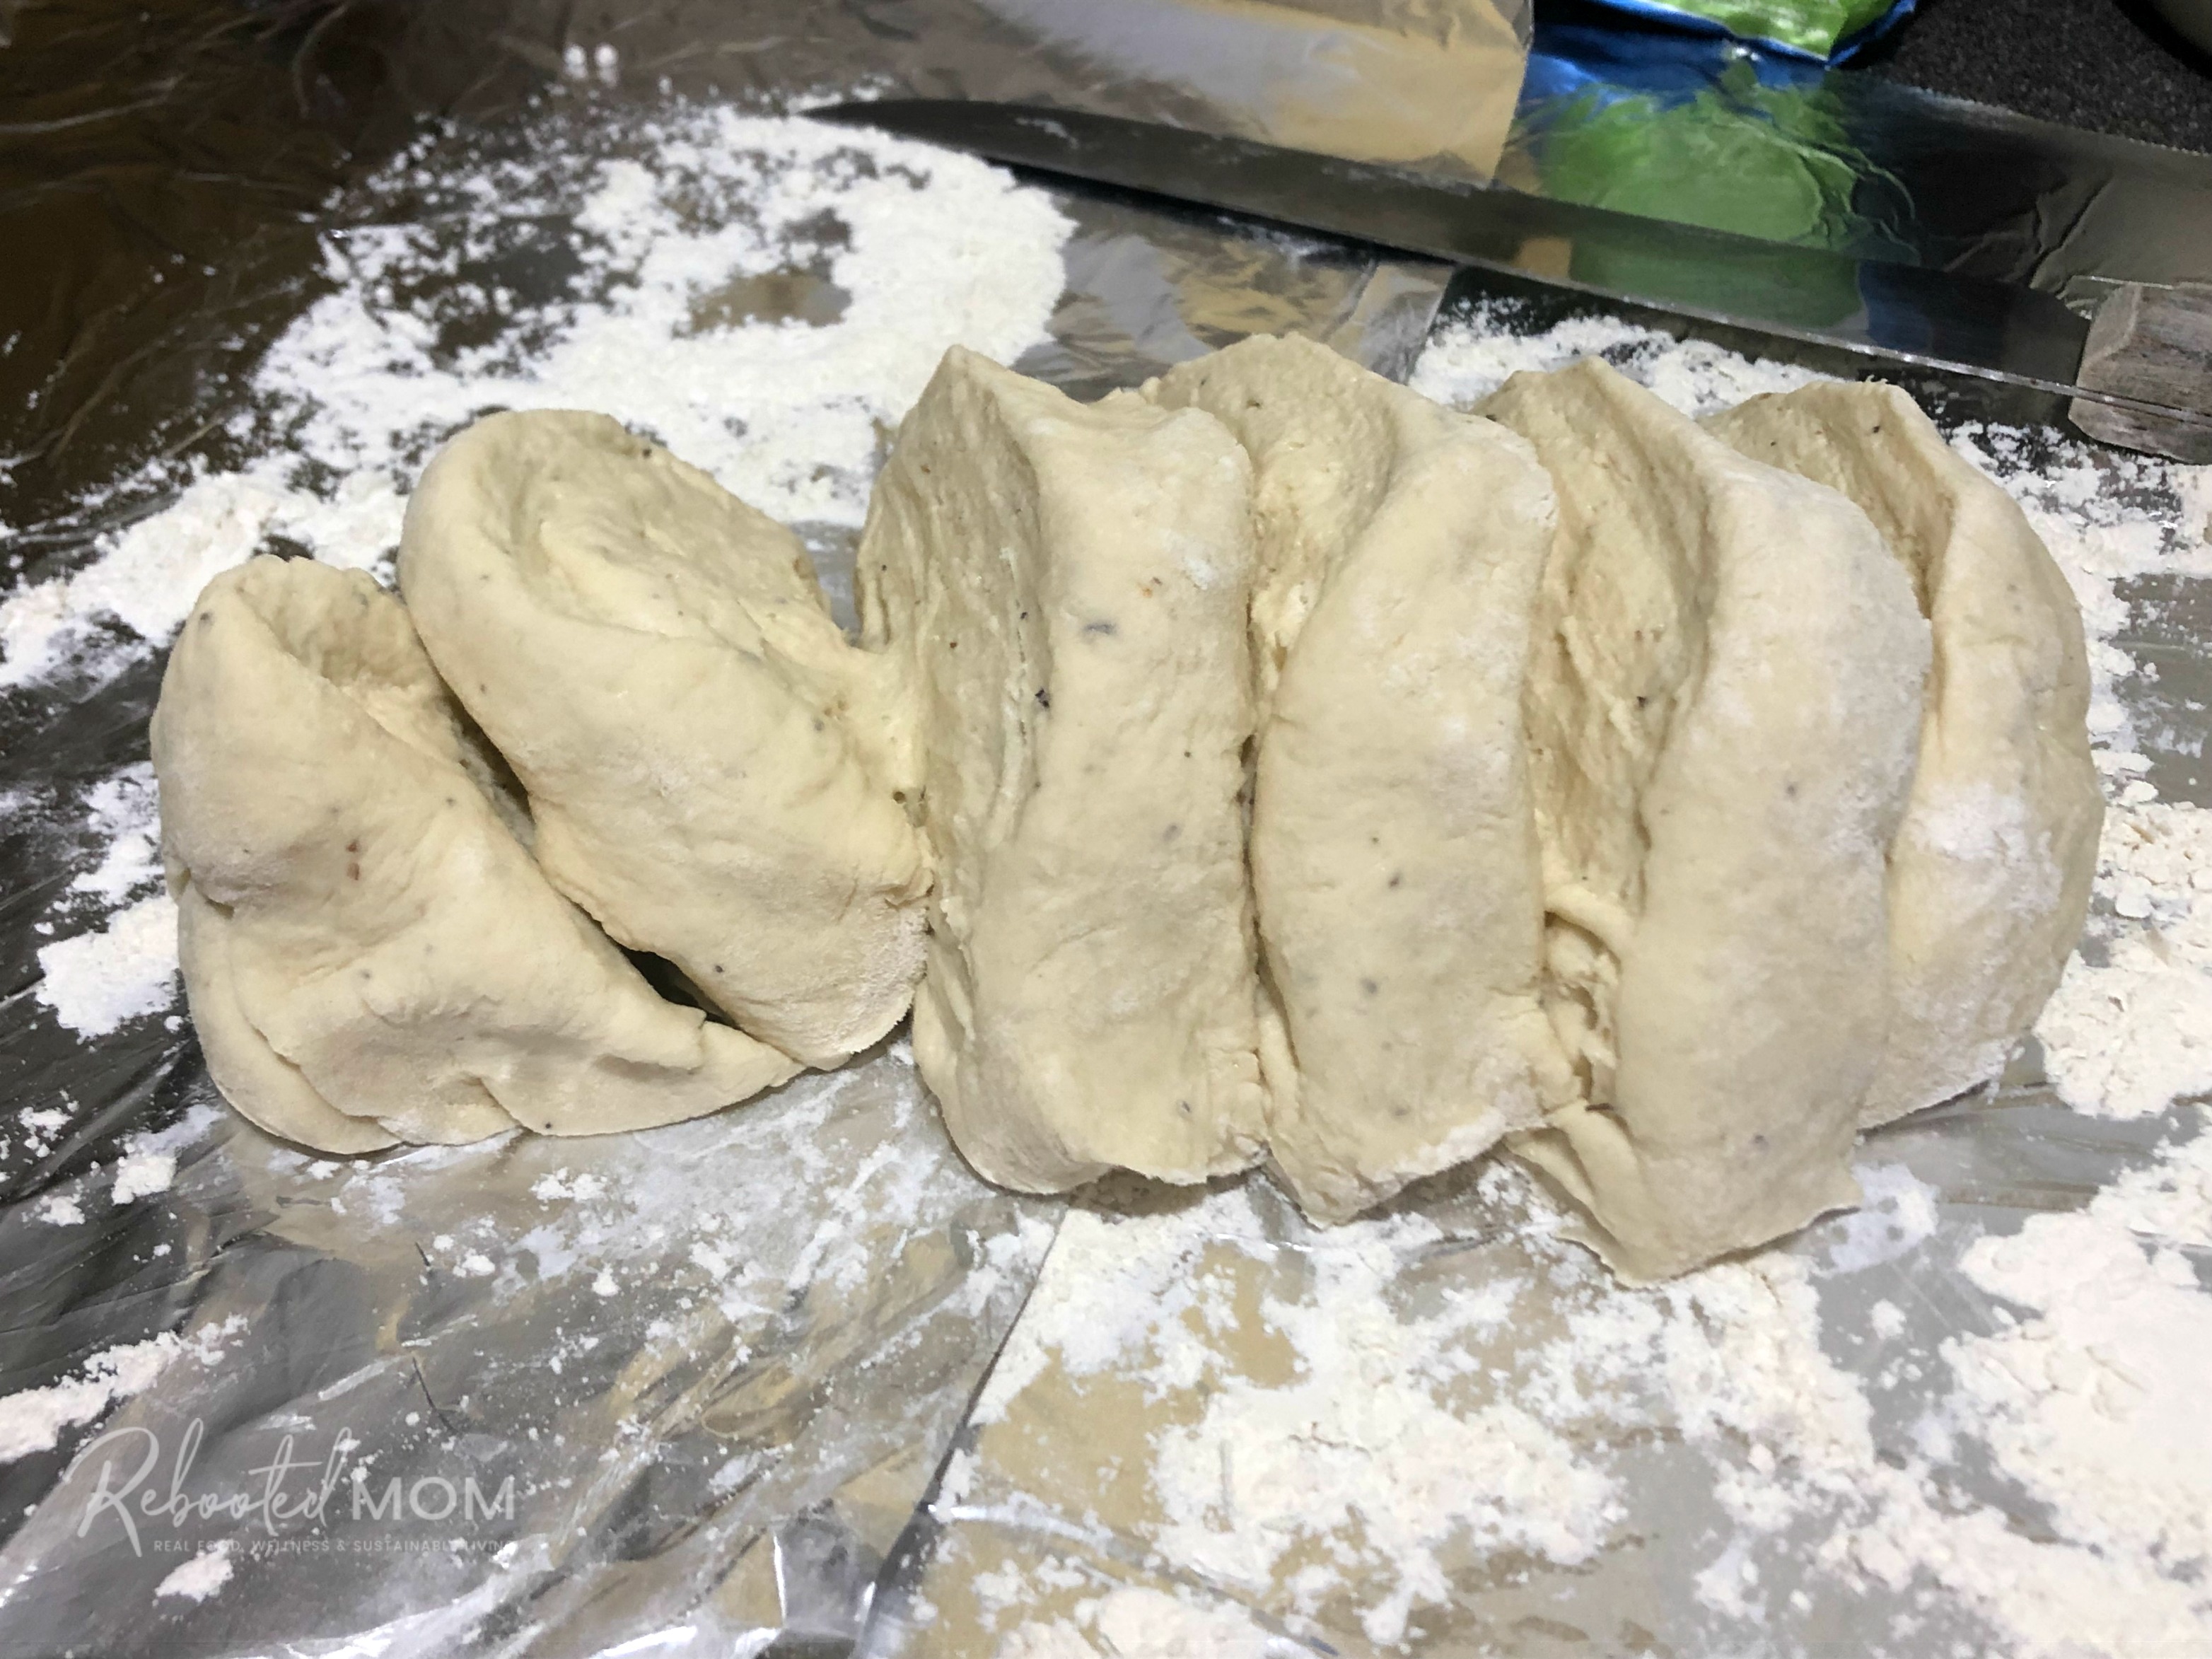 Sectioned Sourdough Dough \\ Delicious sourdough crackers made simply and easily with sourdough discard or unfed starter and seasoned with your favorite herbs!